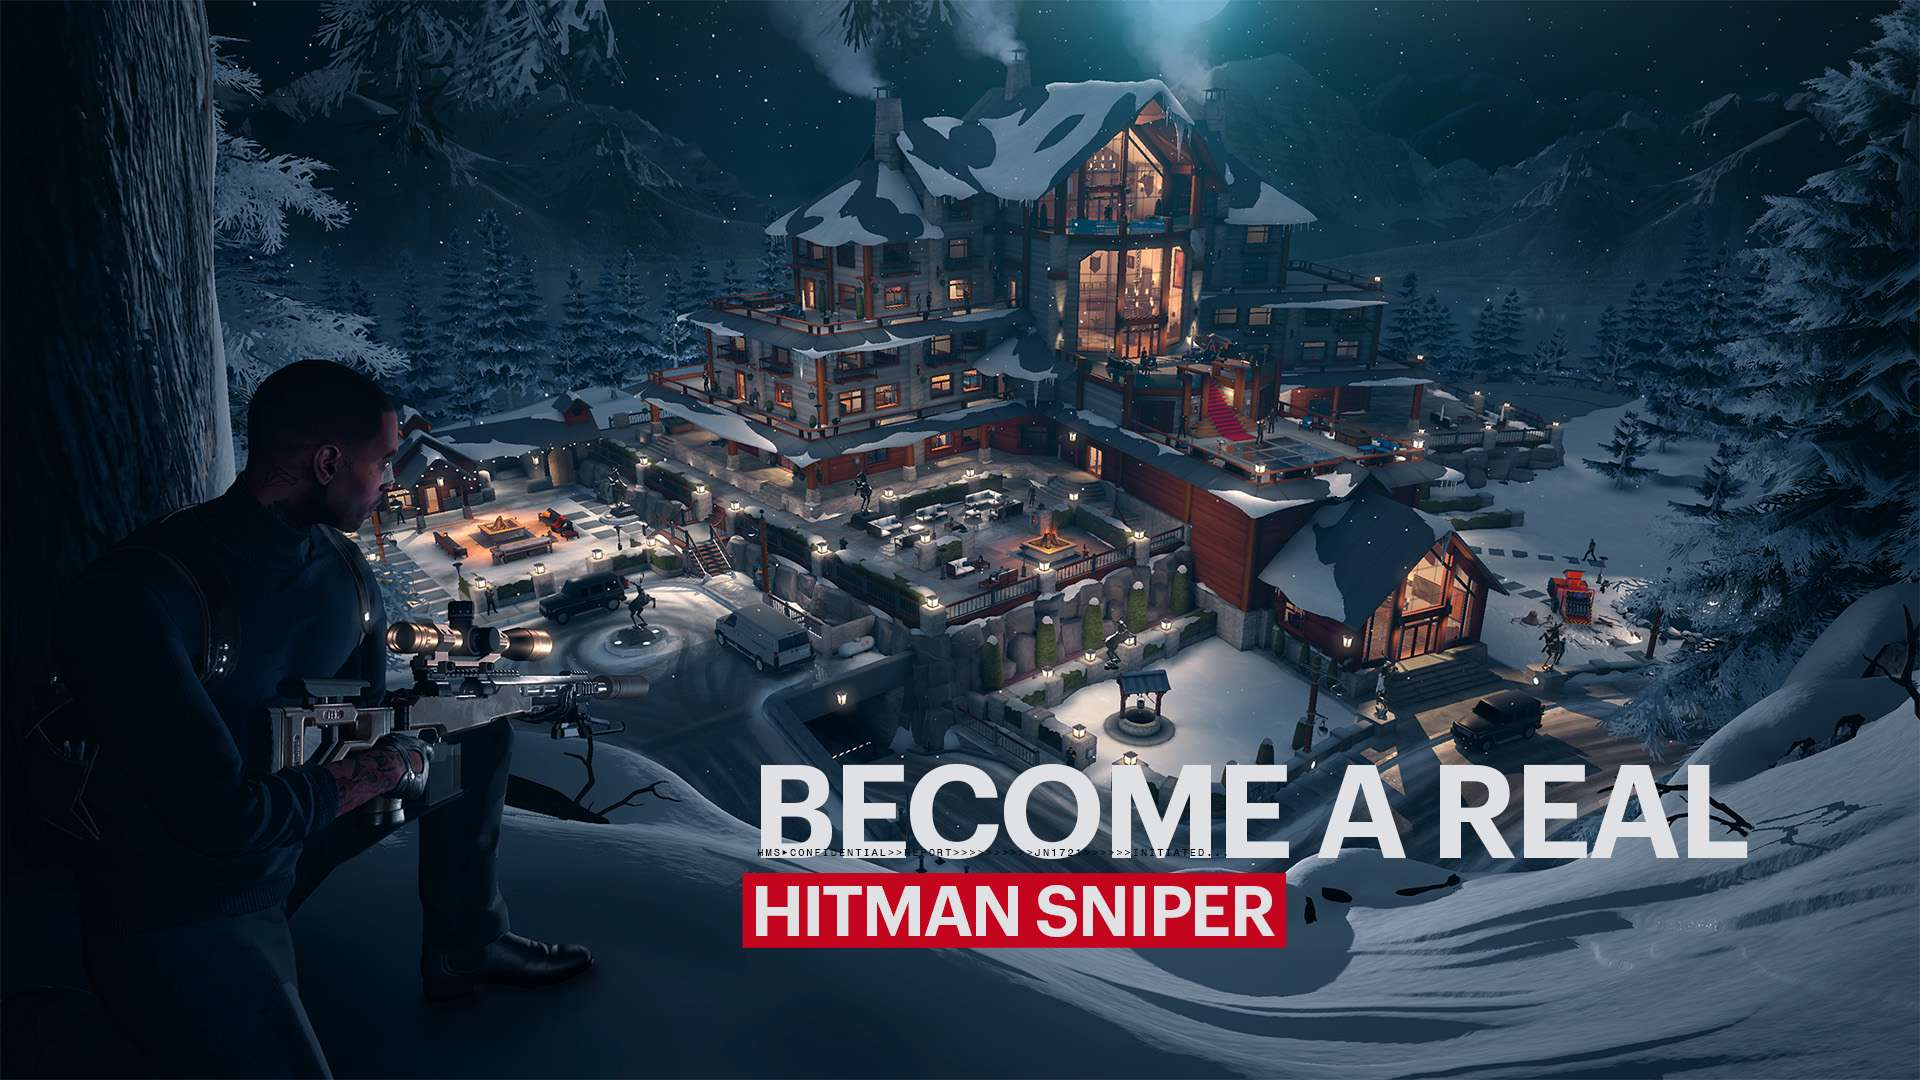 The Hitman Sniper Game Pre-Registration is now available on the Google Play Store-How to Register Hitman Sniper: The Shadows